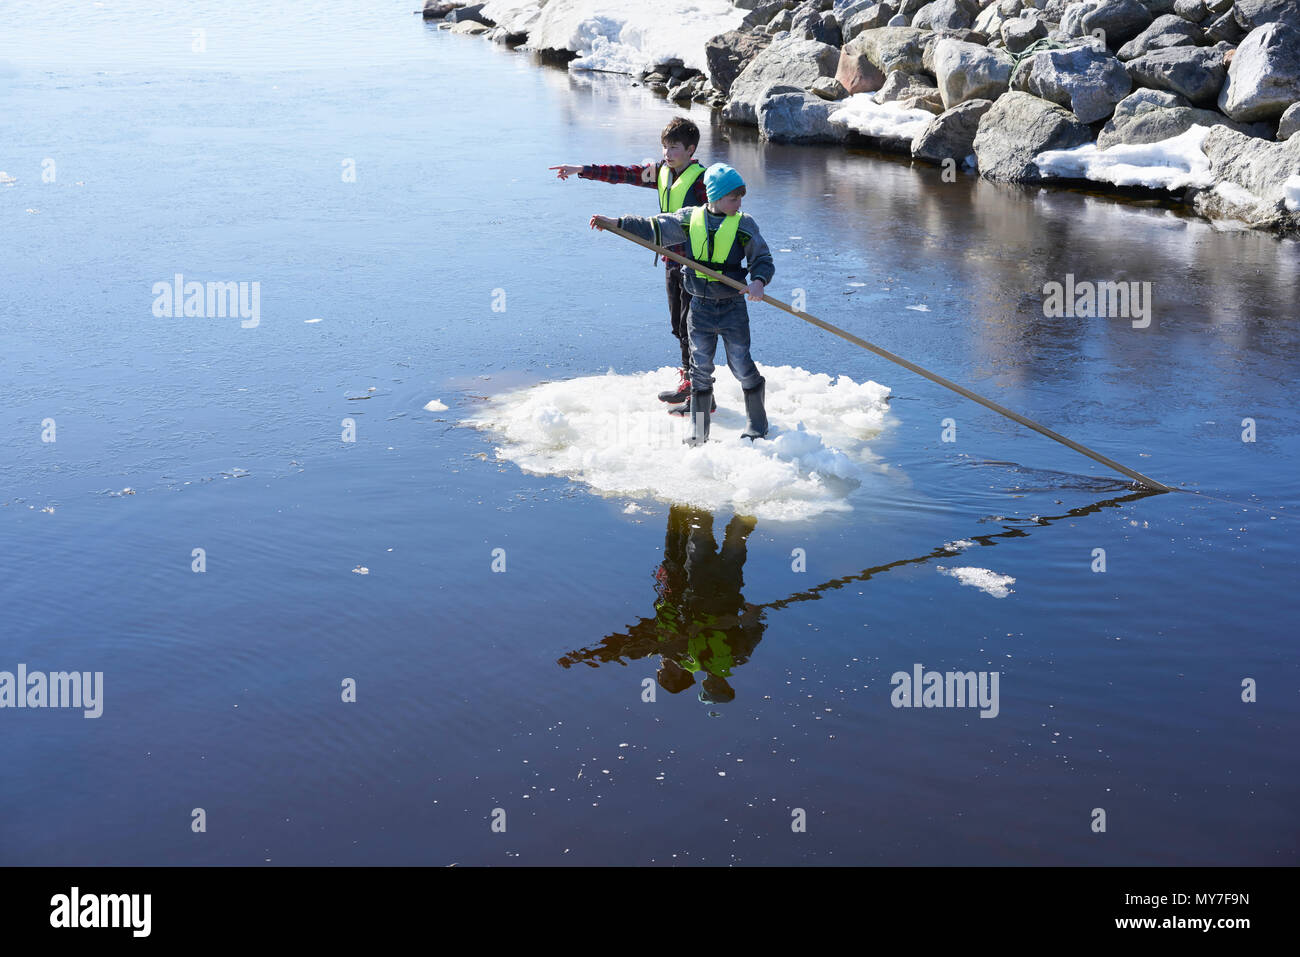 Two boys standing on ice, on lake, pushing themselves along with pole Stock Photo